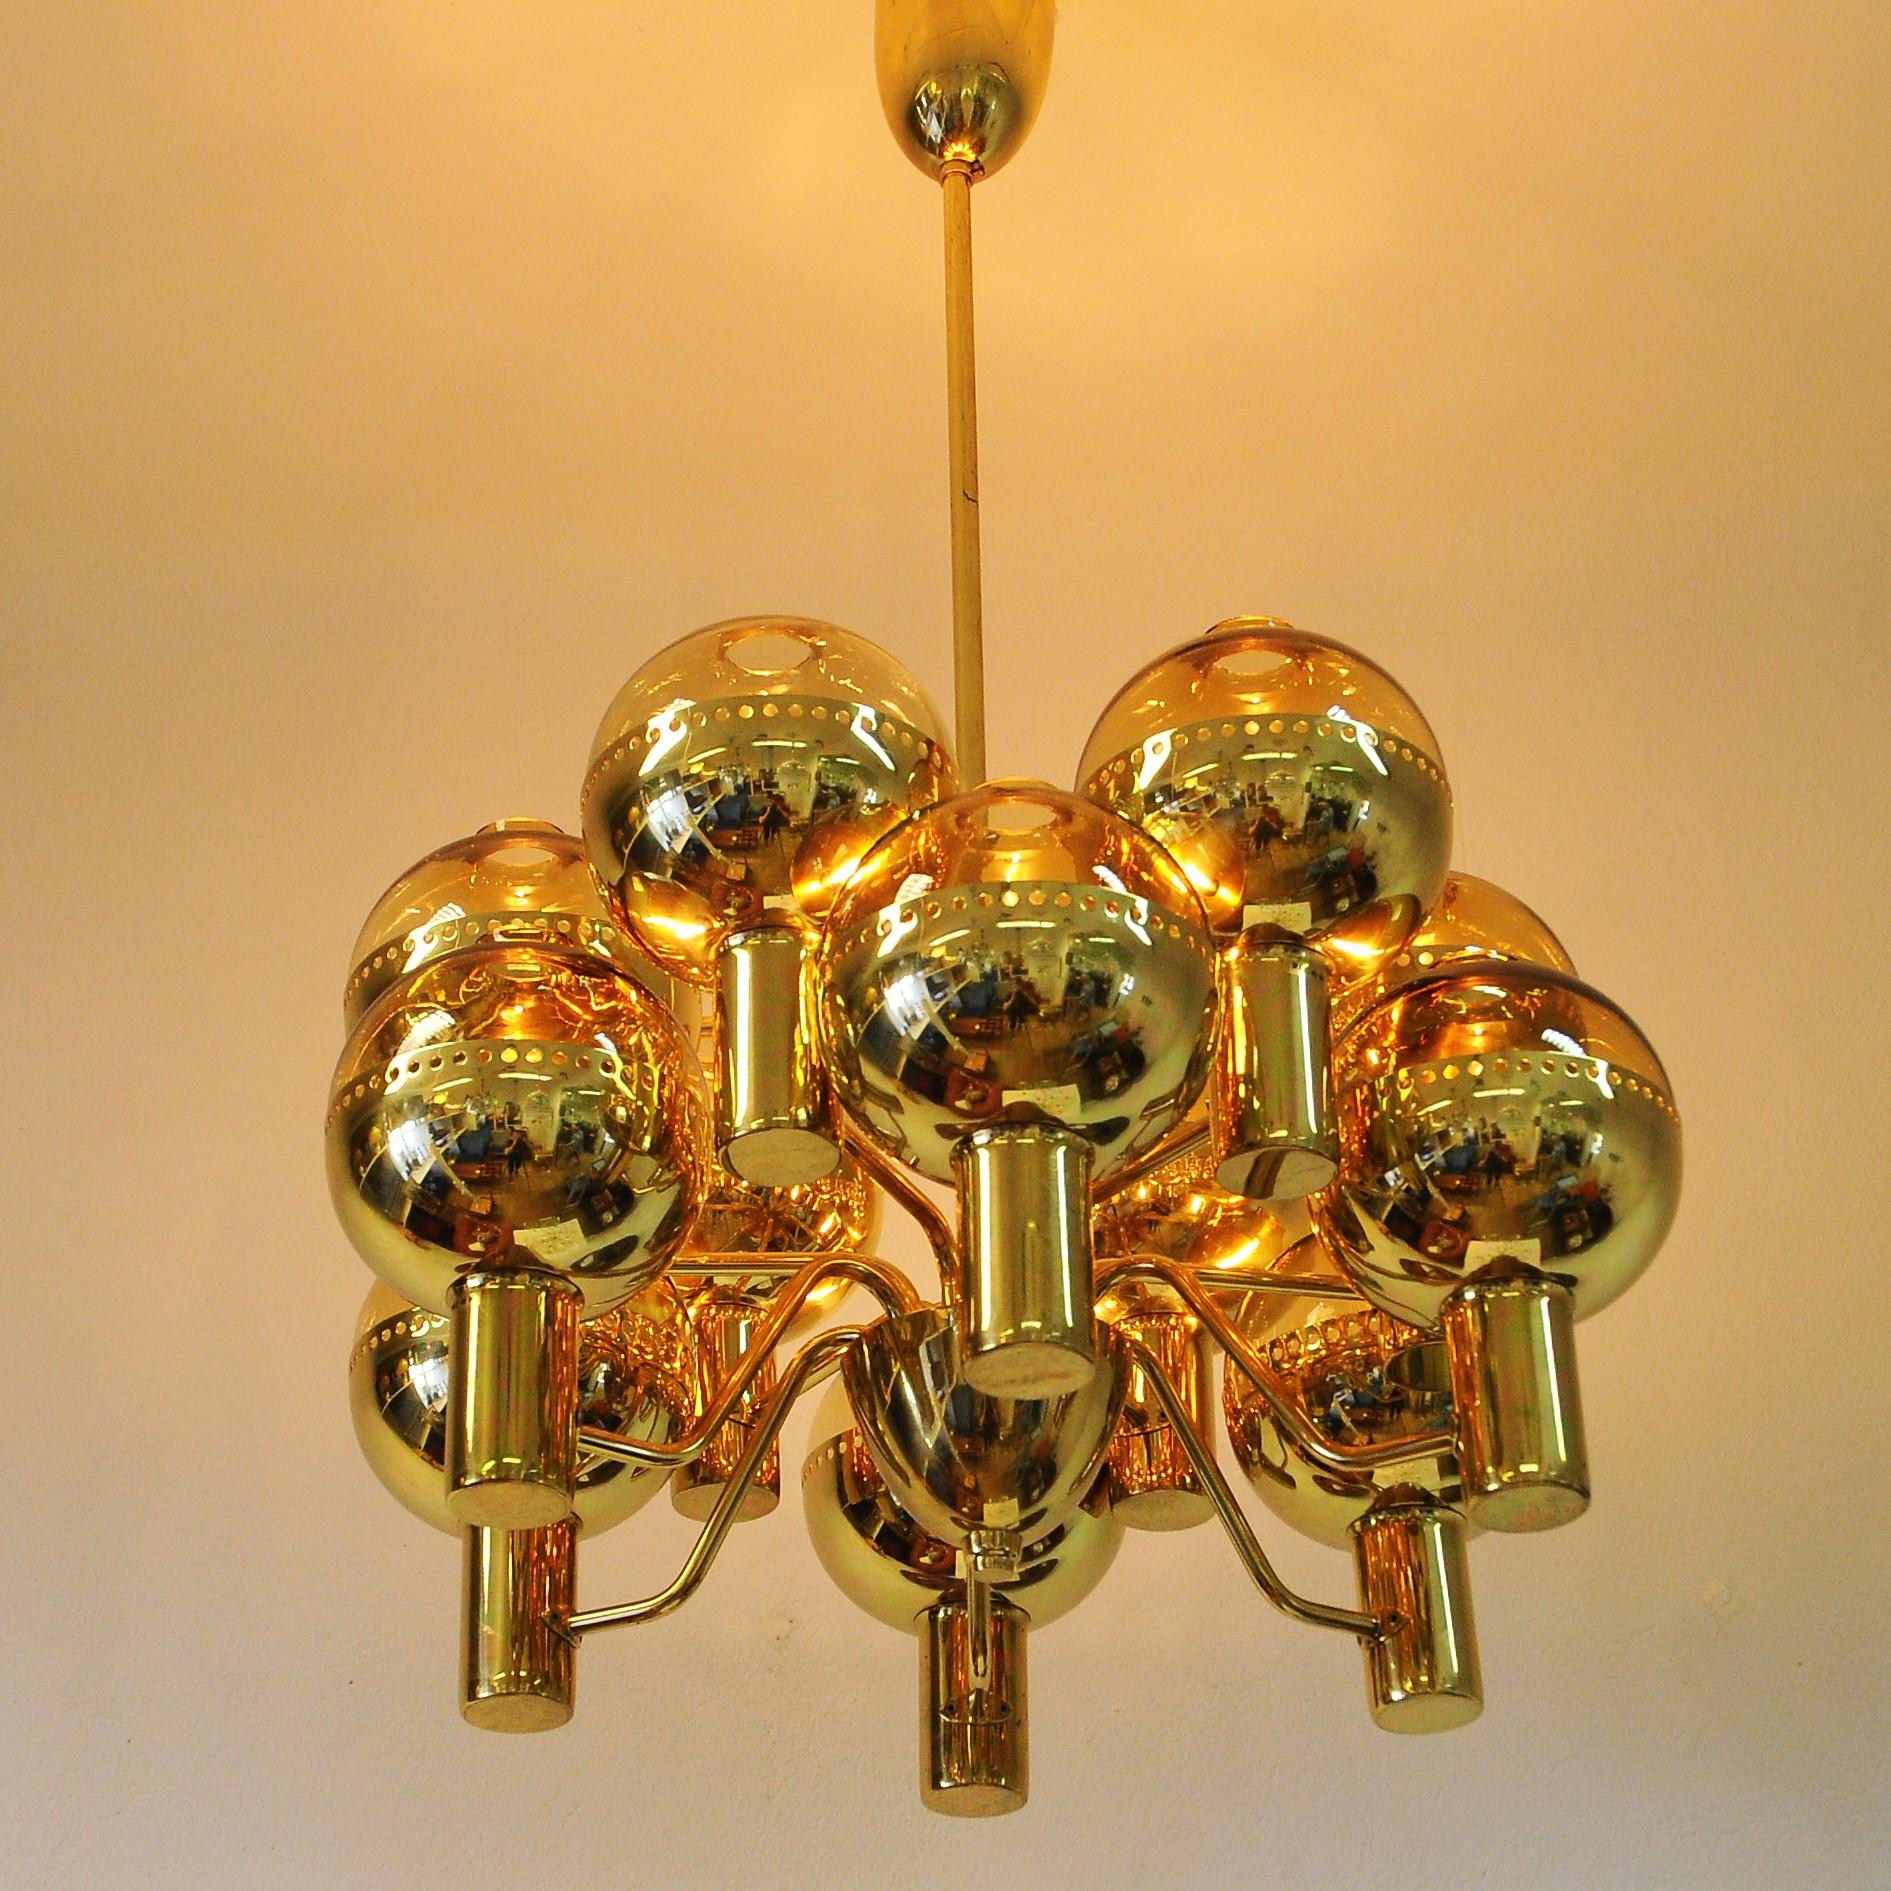 A beautiful and stunning special edition Patricia chandelier model T372/12 by Hans-Agne Jakobsson. Twelve-armed chandelier made in polished brass and gold colored glassdomes held up of golden cup. The cups have small round holes around the boarder.